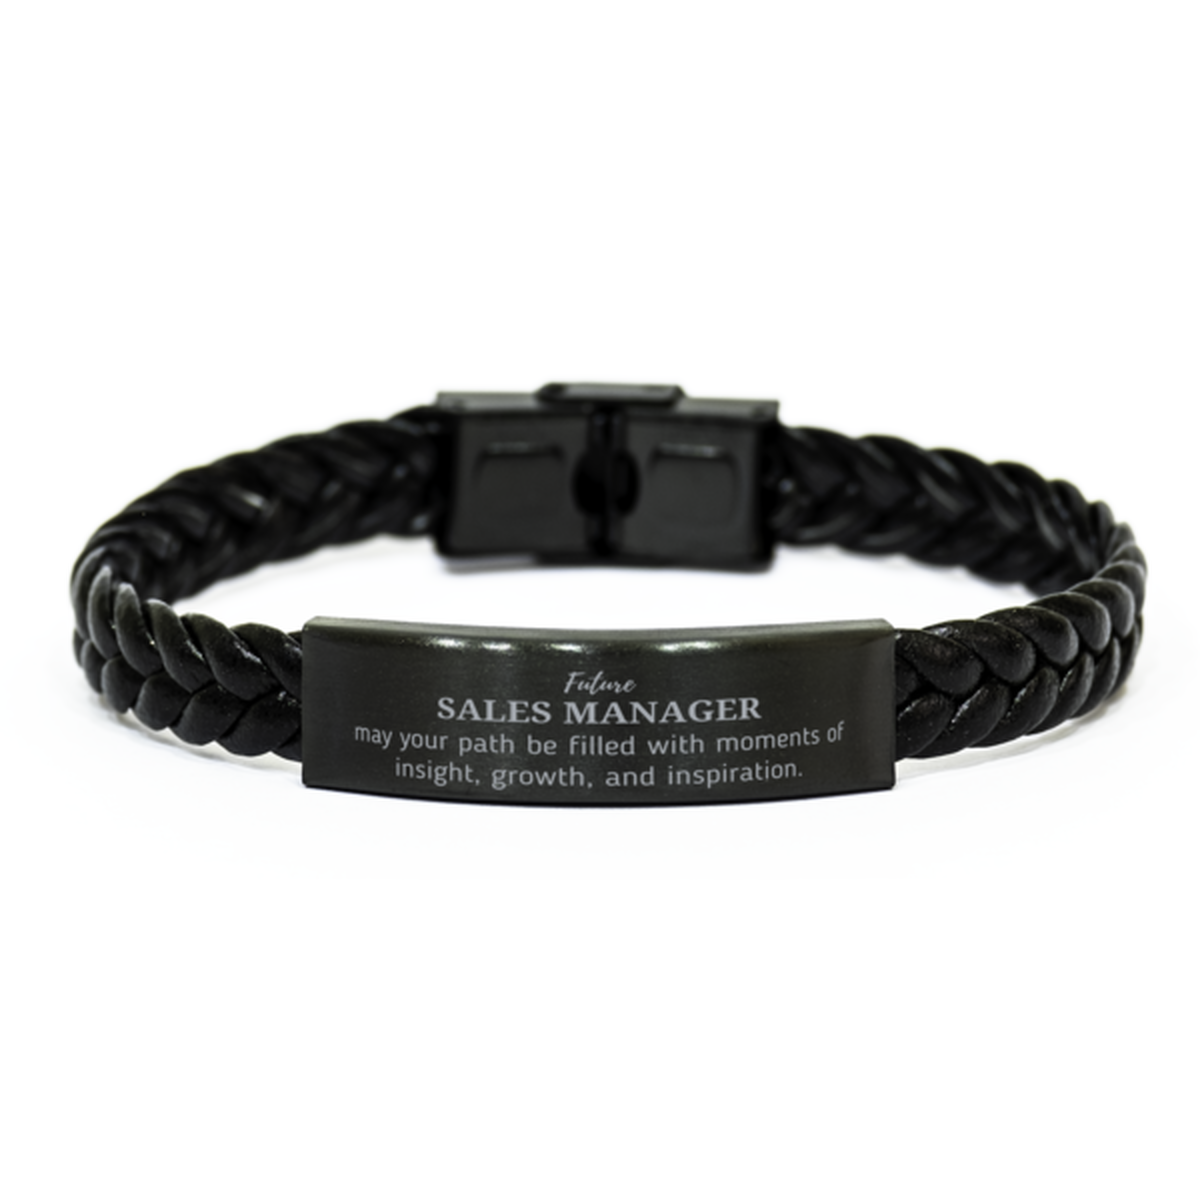 Future Sales Manager Gifts, May your path be filled with moments of insight, Graduation Gifts for New Sales Manager, Christmas Unique Braided Leather Bracelet For Men, Women, Friends